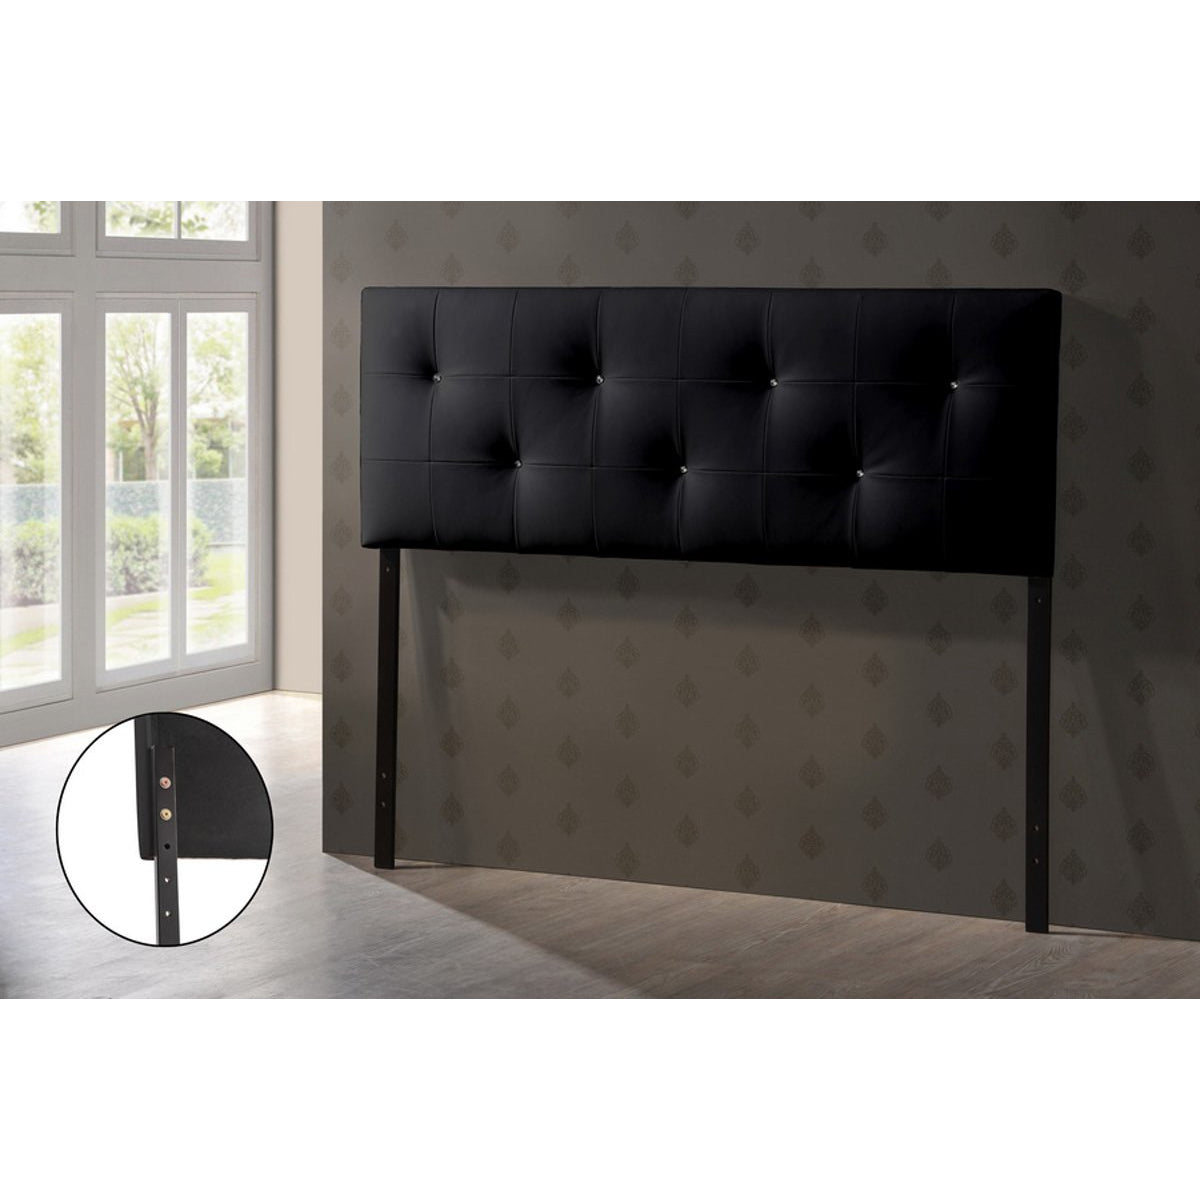 Baxton Studio Dalini Modern and Contemporary Queen Black Faux Leather Headboard with Faux Crystal Buttons Baxton Studio-Headboards-Minimal And Modern - 2